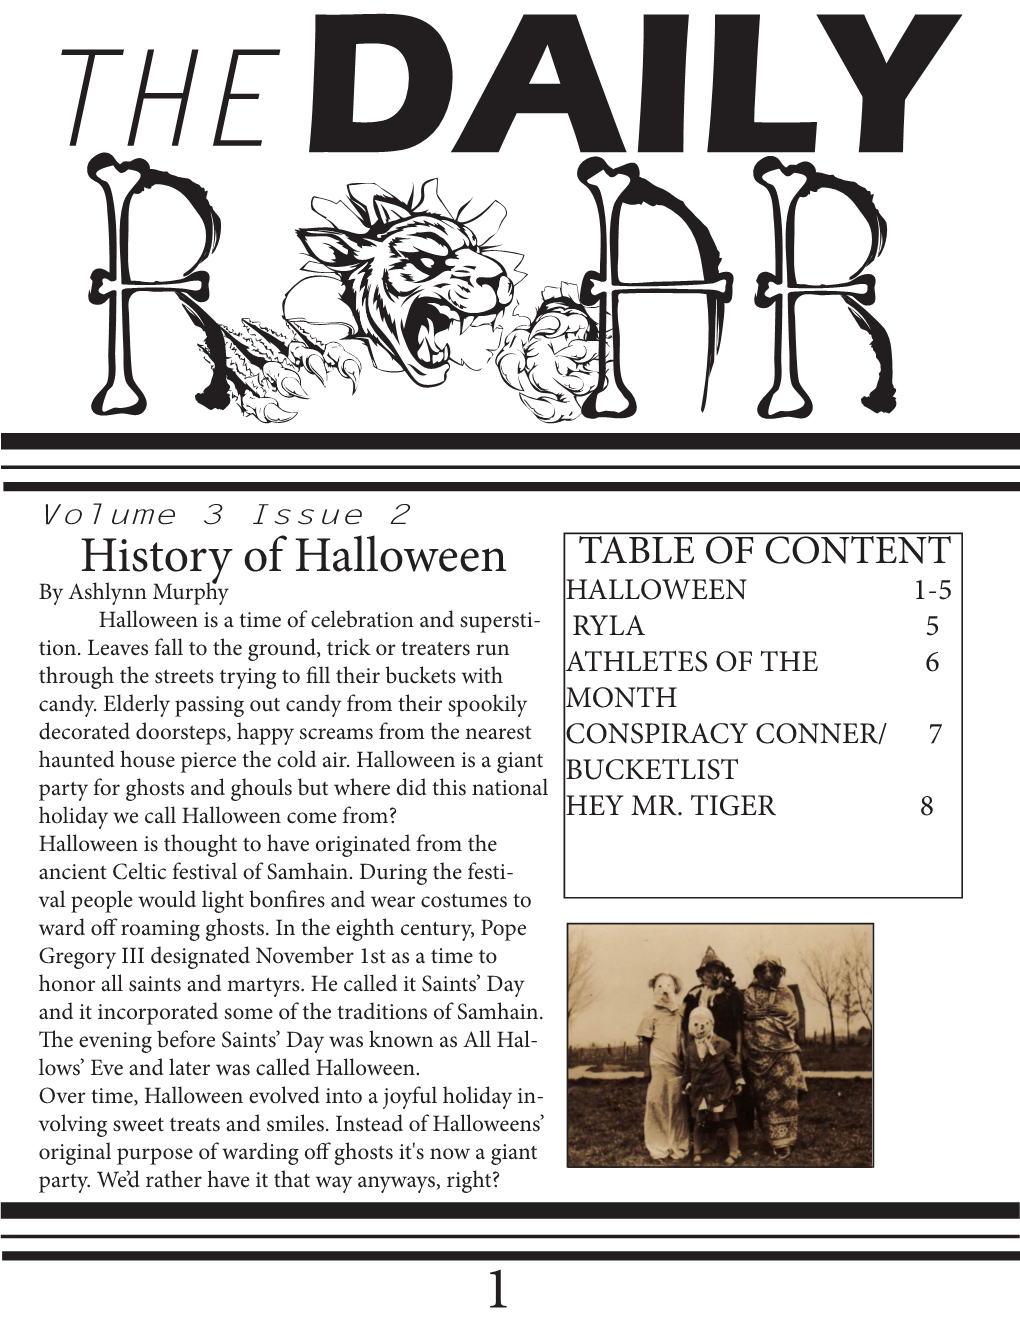 History of Halloween TABLE of CONTENT by Ashlynn Murphy HALLOWEEN 1-5 Halloween Is a Time of Celebration and Supersti- RYLA 5 Tion